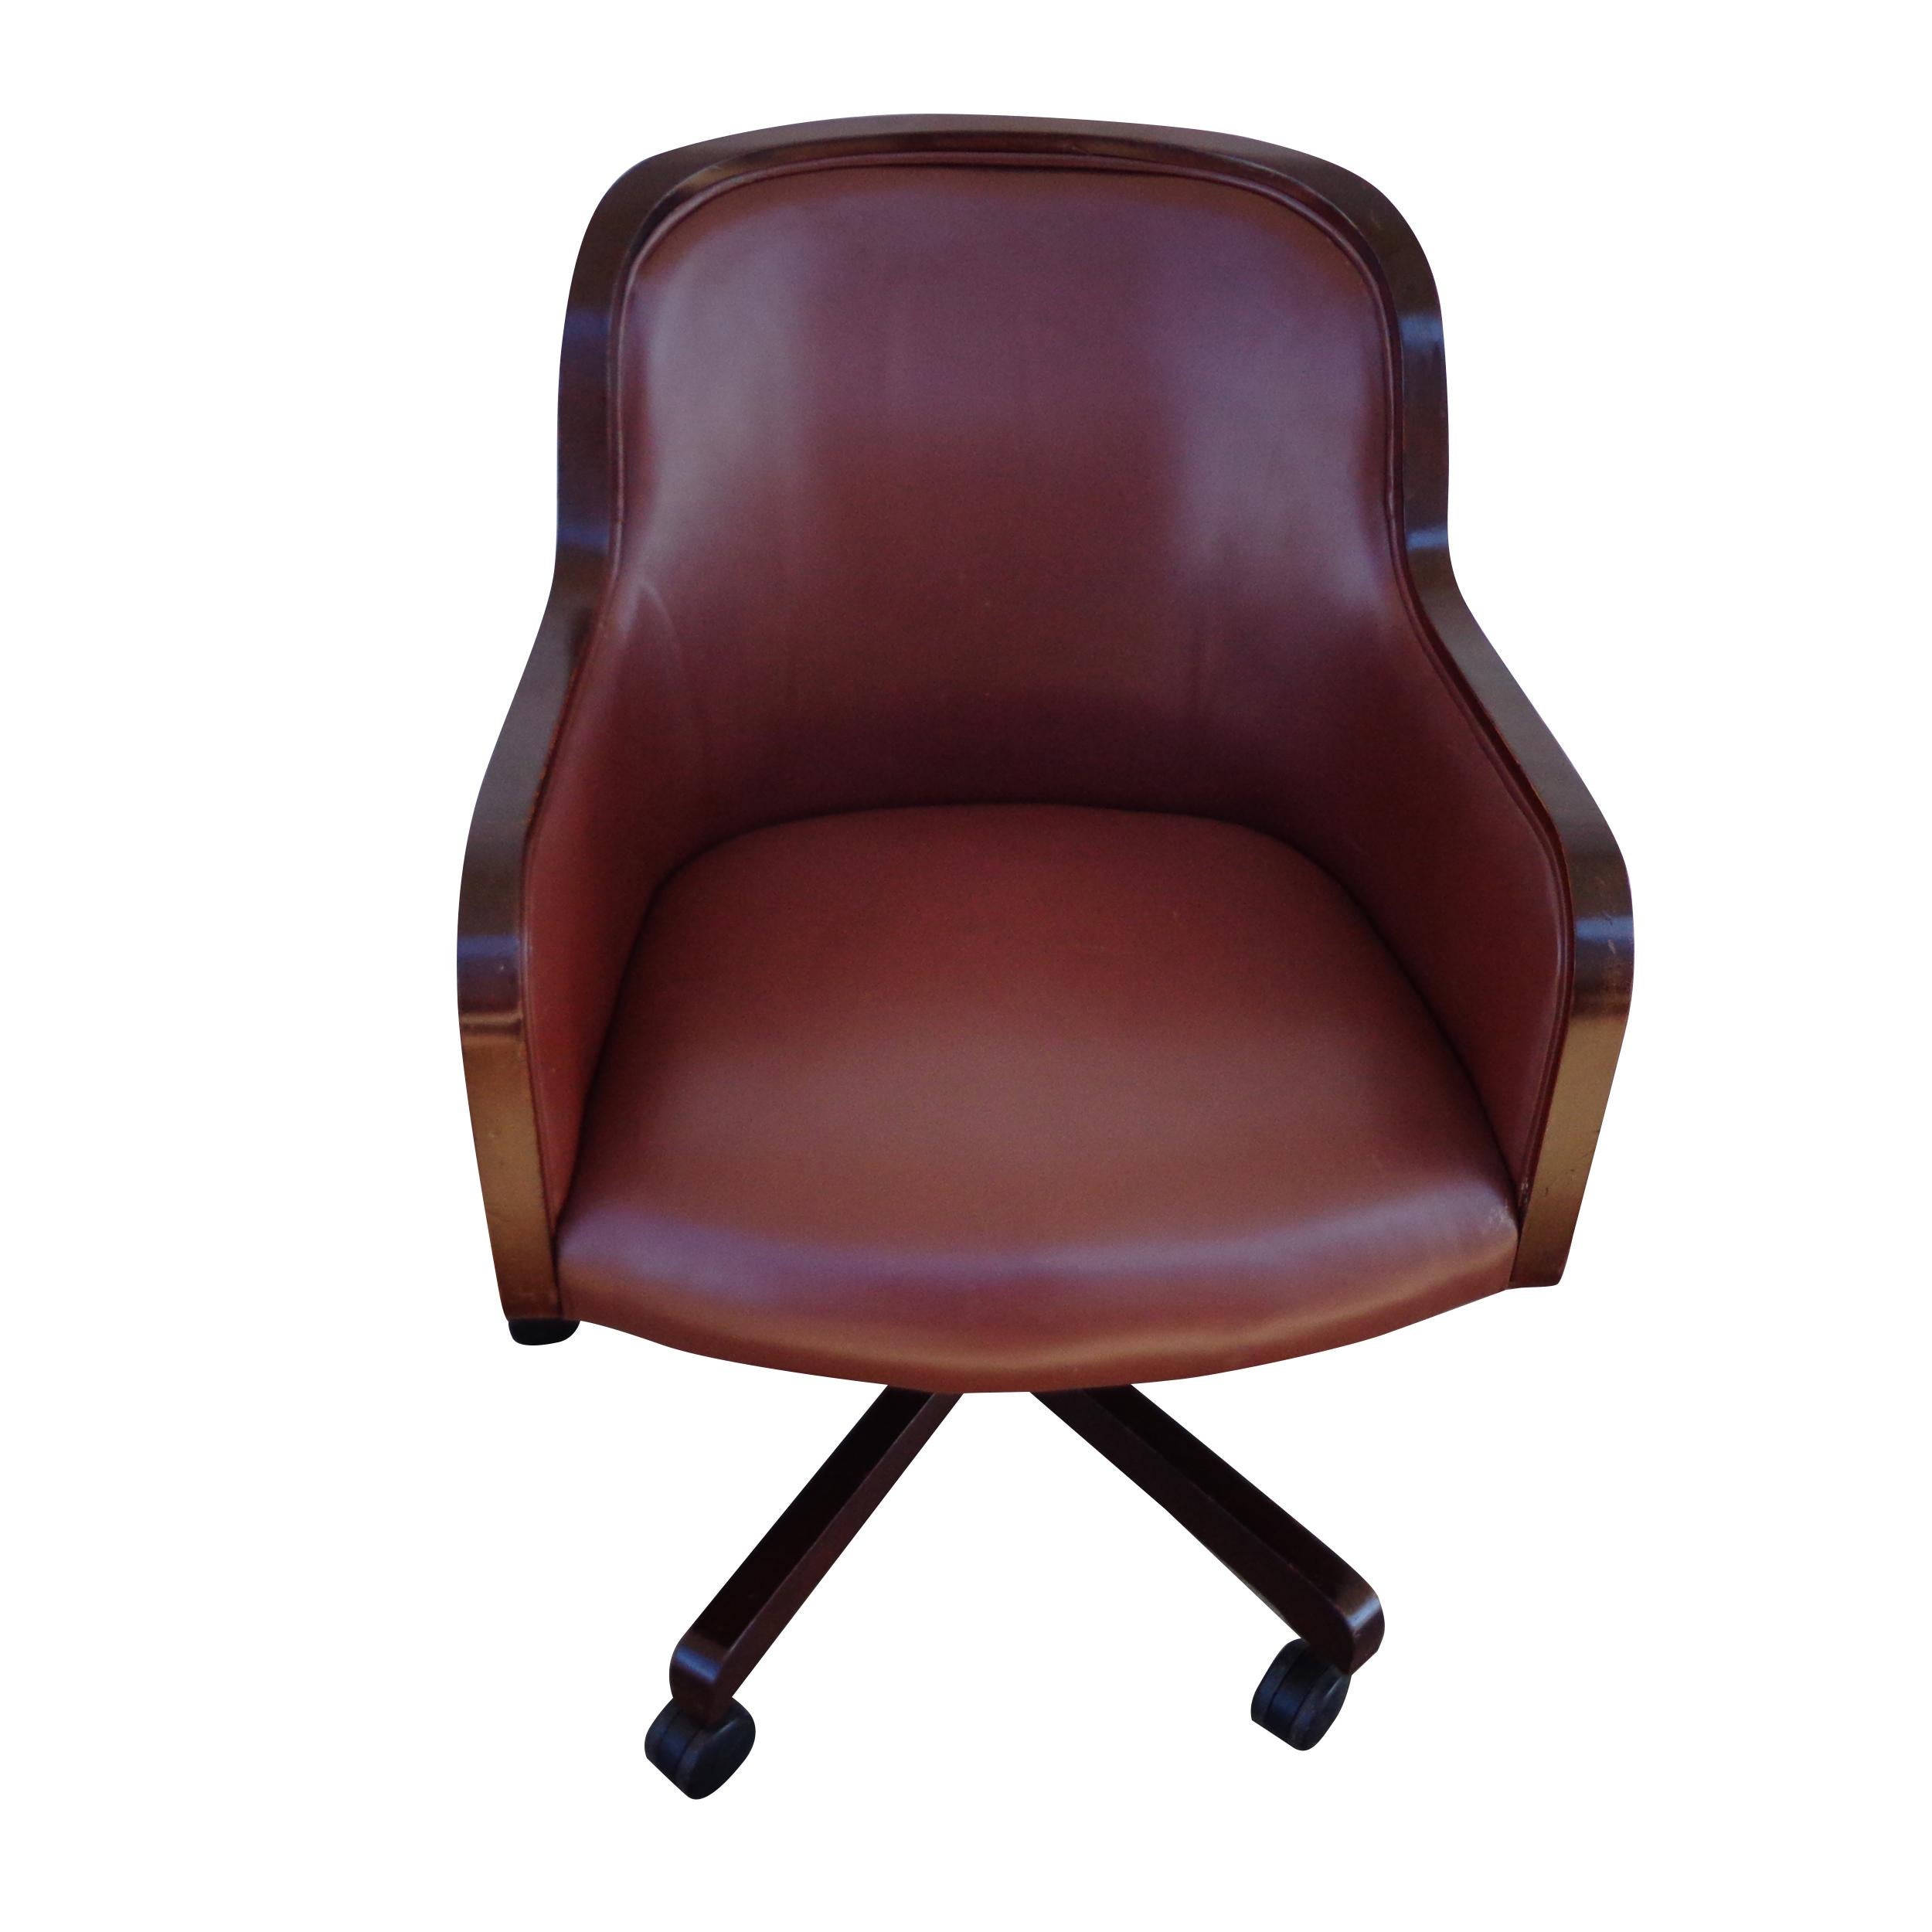 Late 20th Century 1 Ward Bennett for Brickel and Associates Leather Desk Chair For Sale